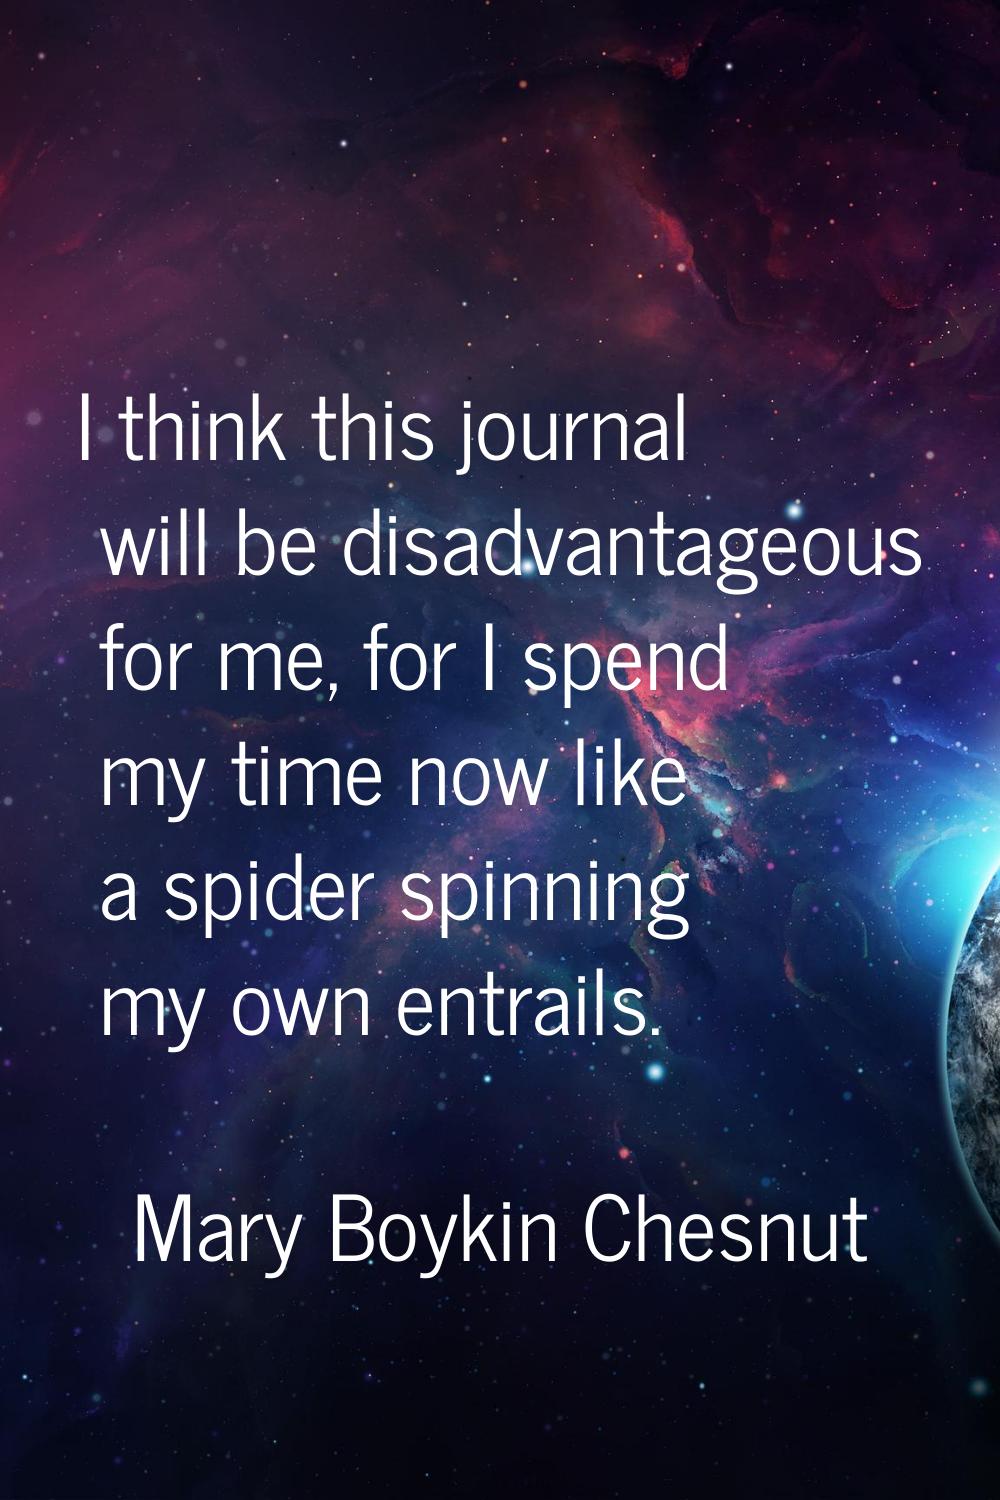 I think this journal will be disadvantageous for me, for I spend my time now like a spider spinning